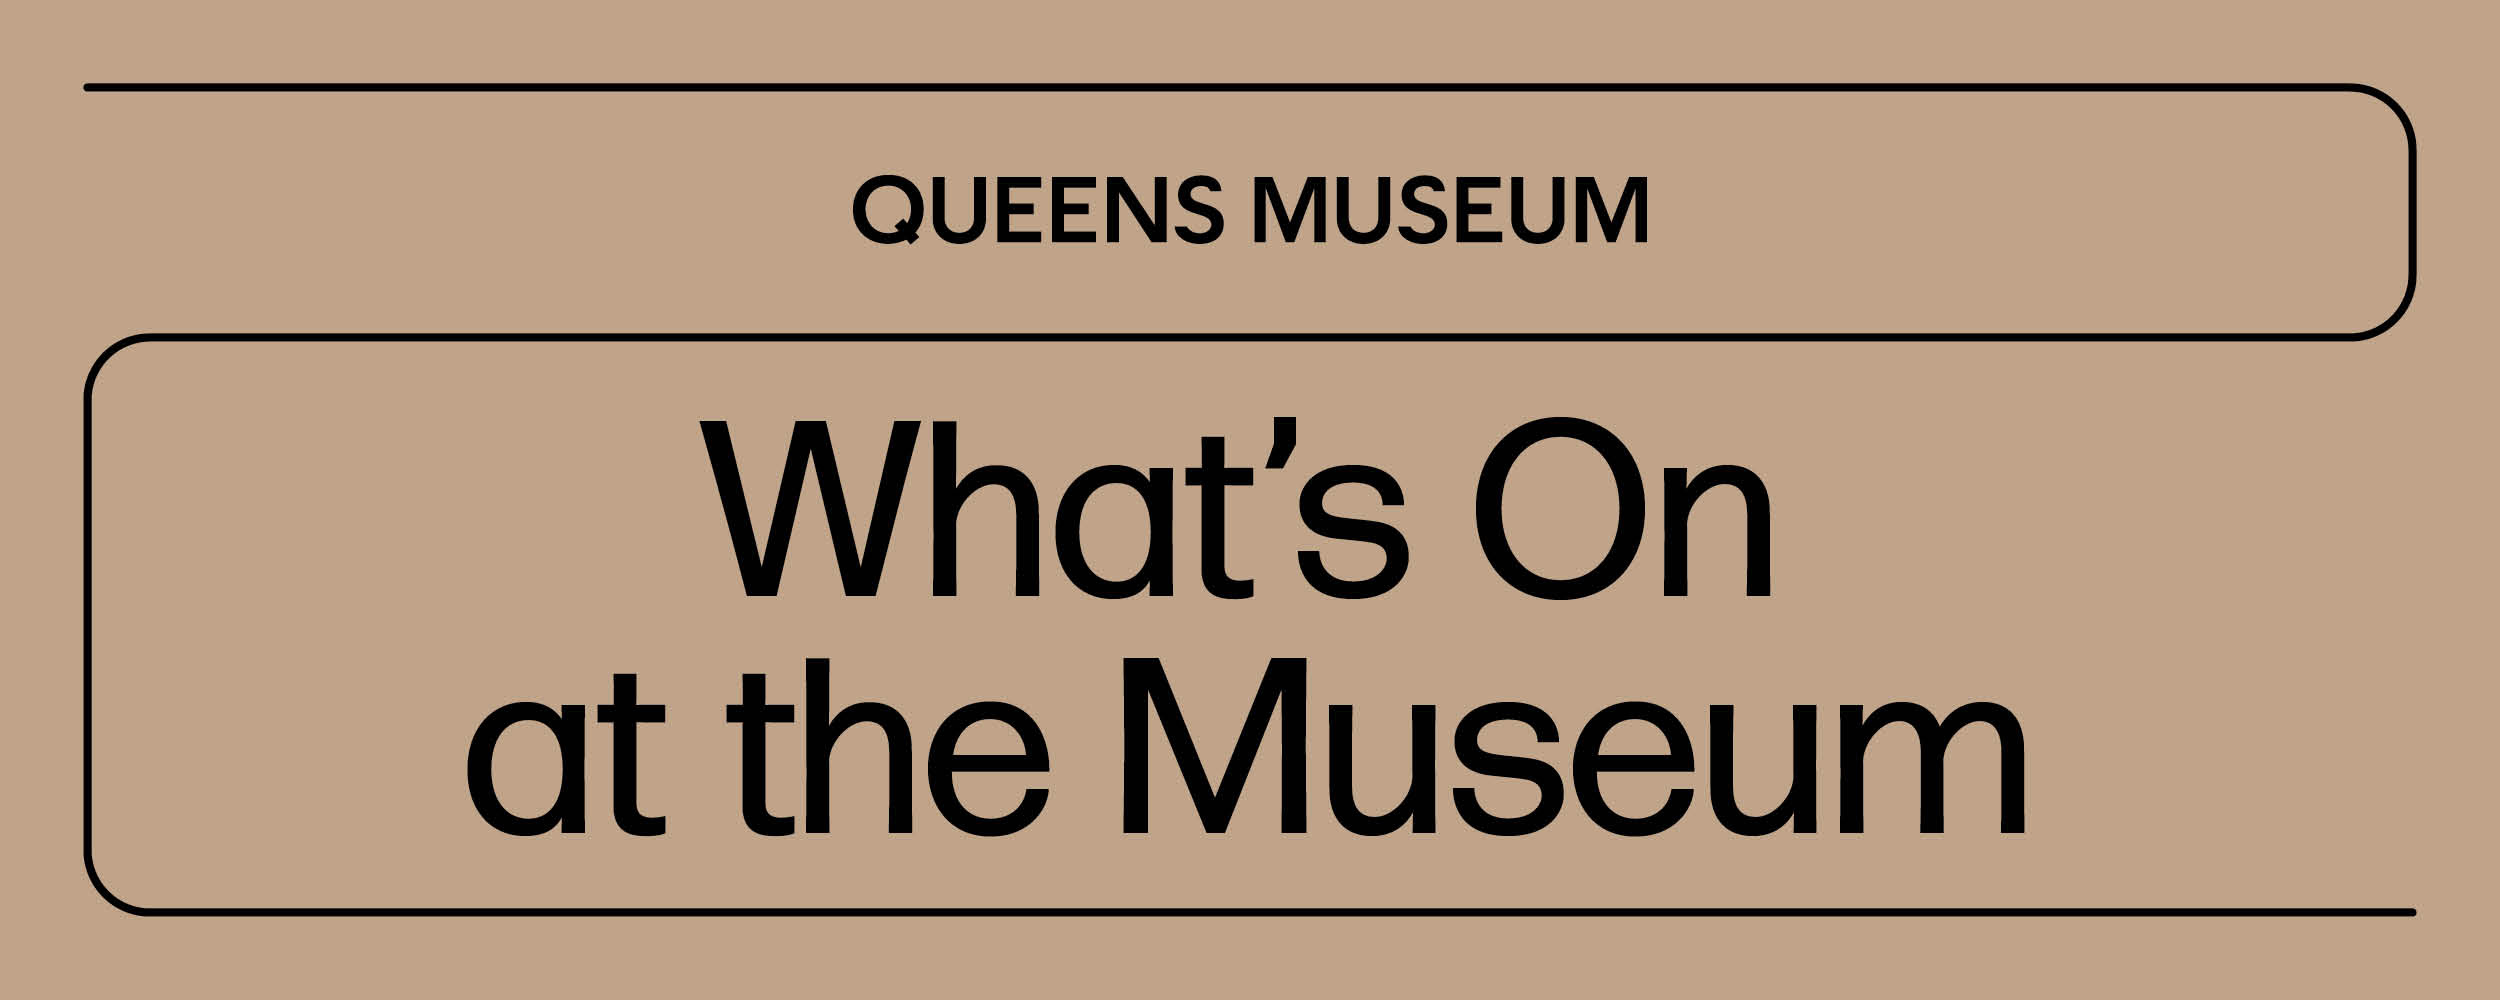 Black text on beige background with the Queens Museum logo followed by "What's On at the Museum"